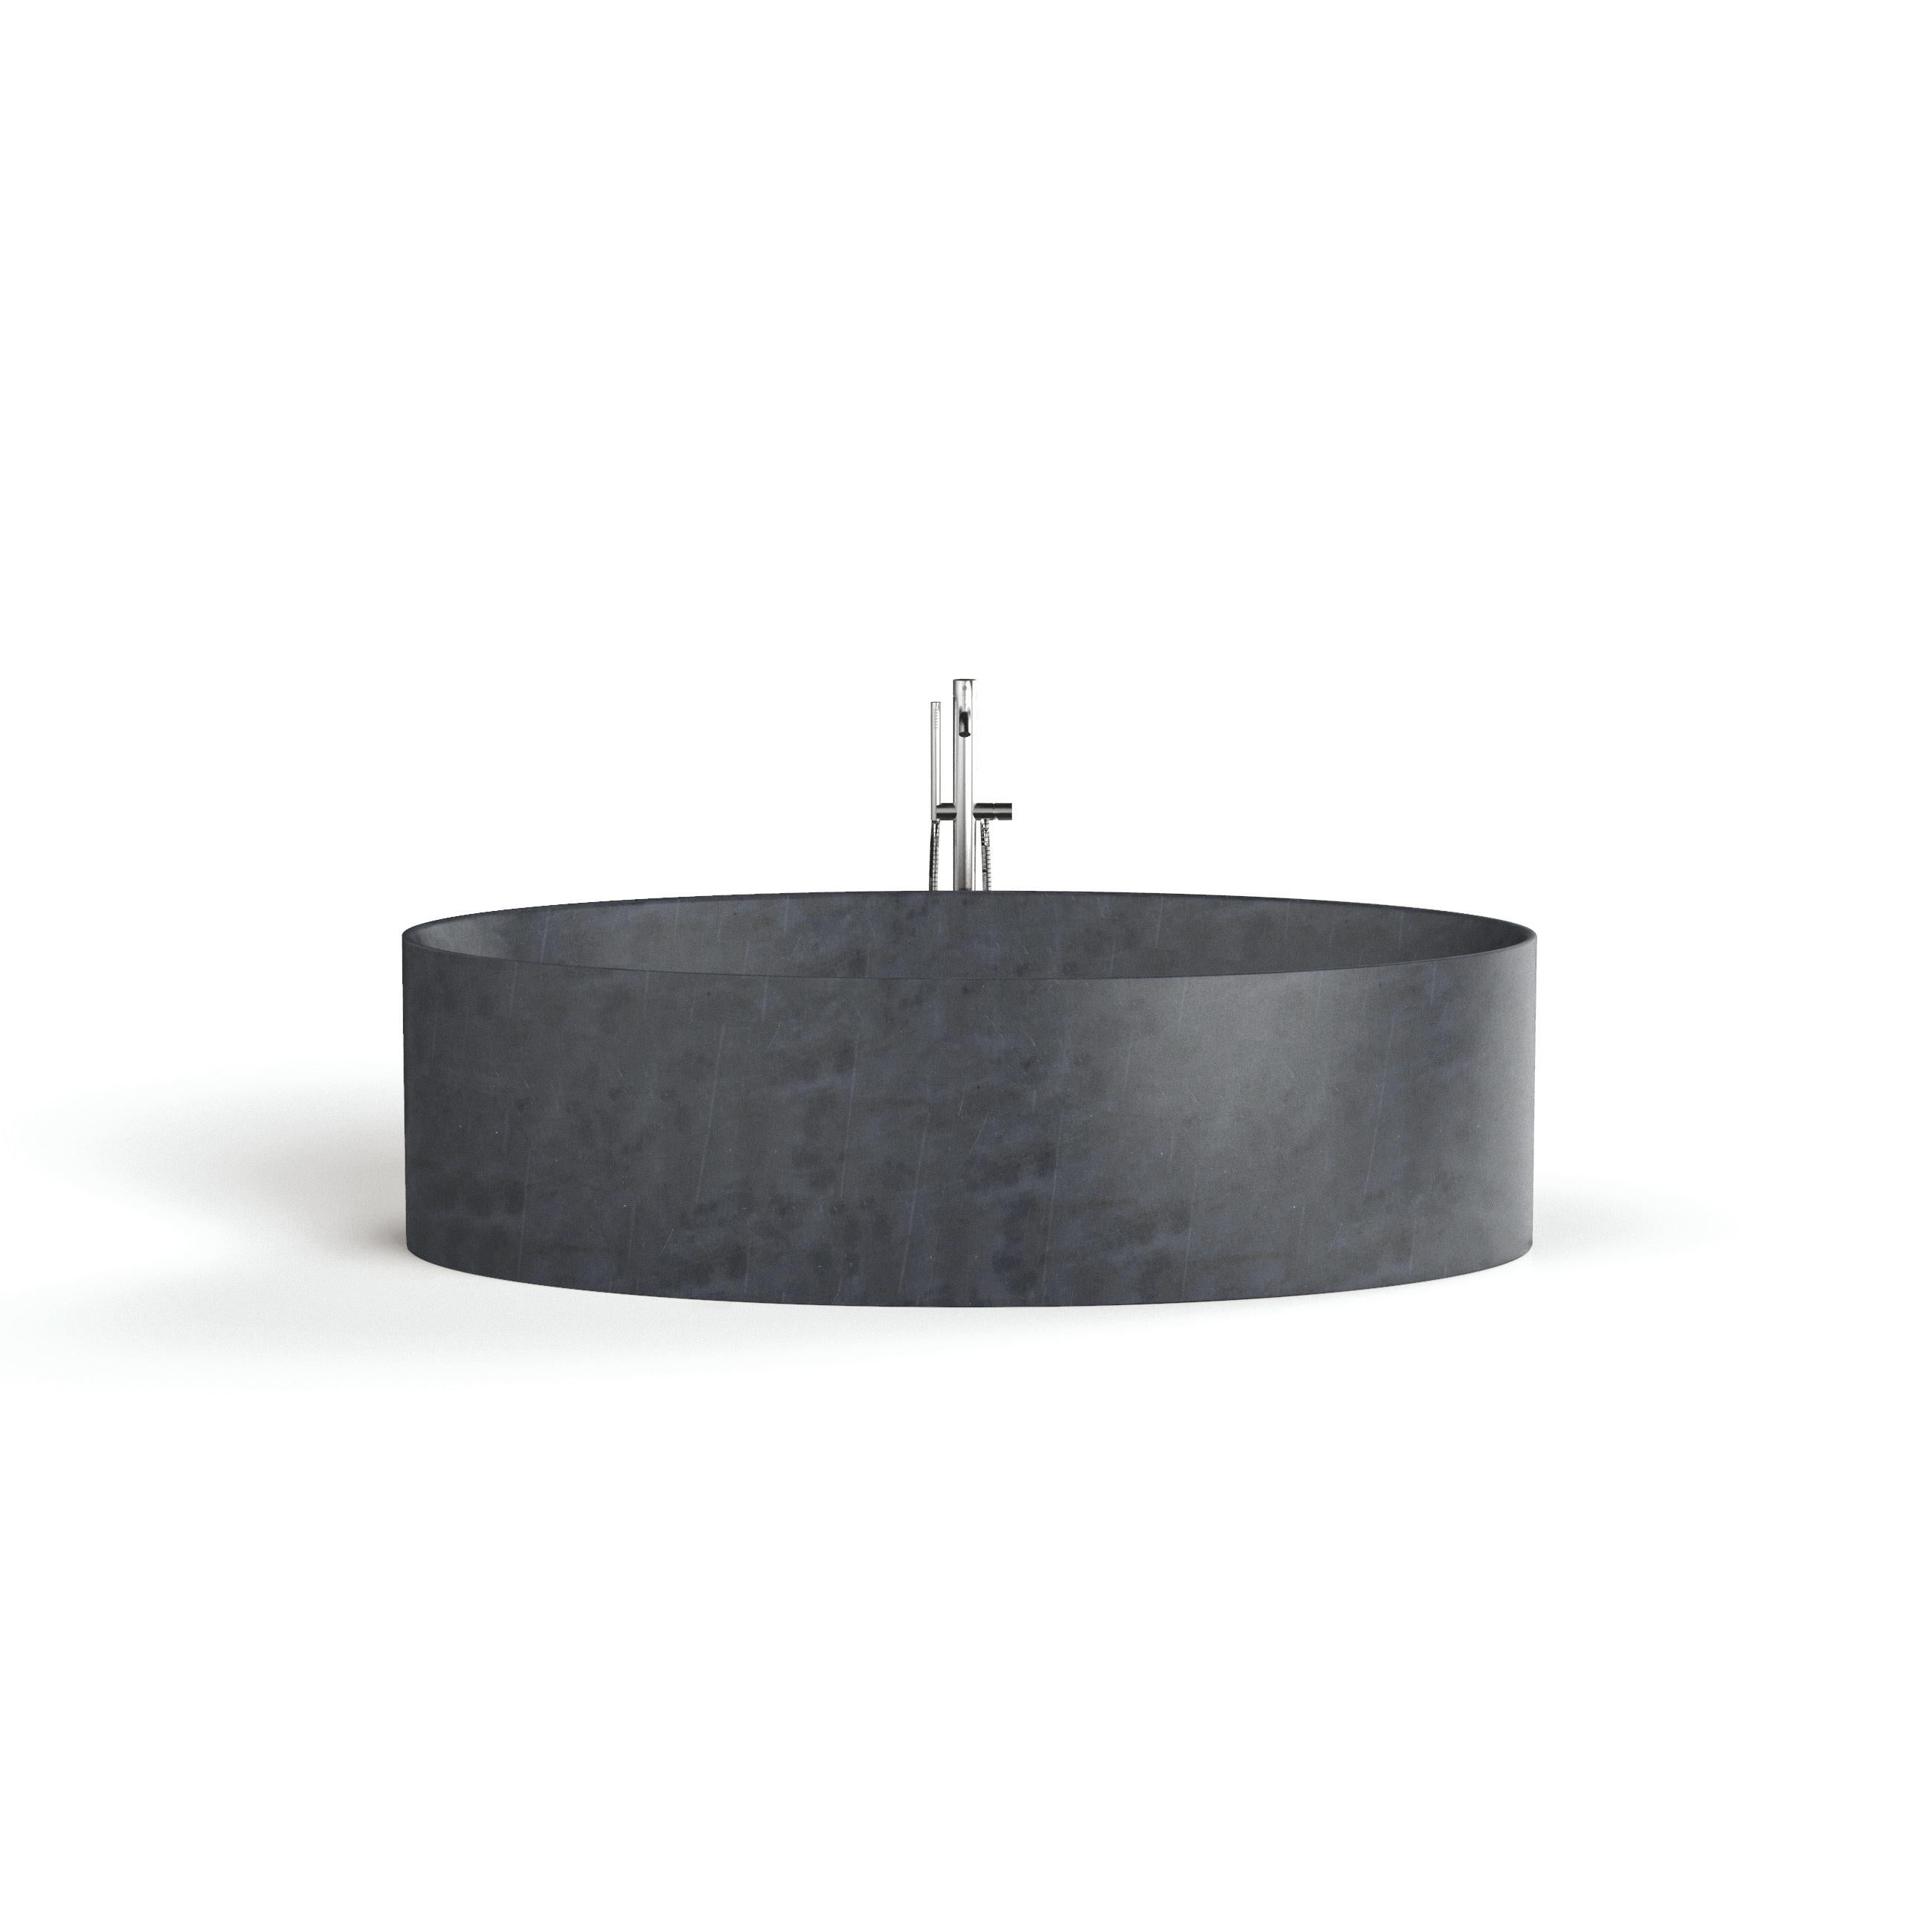 Entity Ovale bath by Marmi Serafini
Materials: Pietra Lavica marble.
Dimensions: D 105 x W 180 x H 50 cm
Available in other marbles.
Tap not included.

Entirely made from one piece of stone, with the matching waste-drain cover this bath has generous